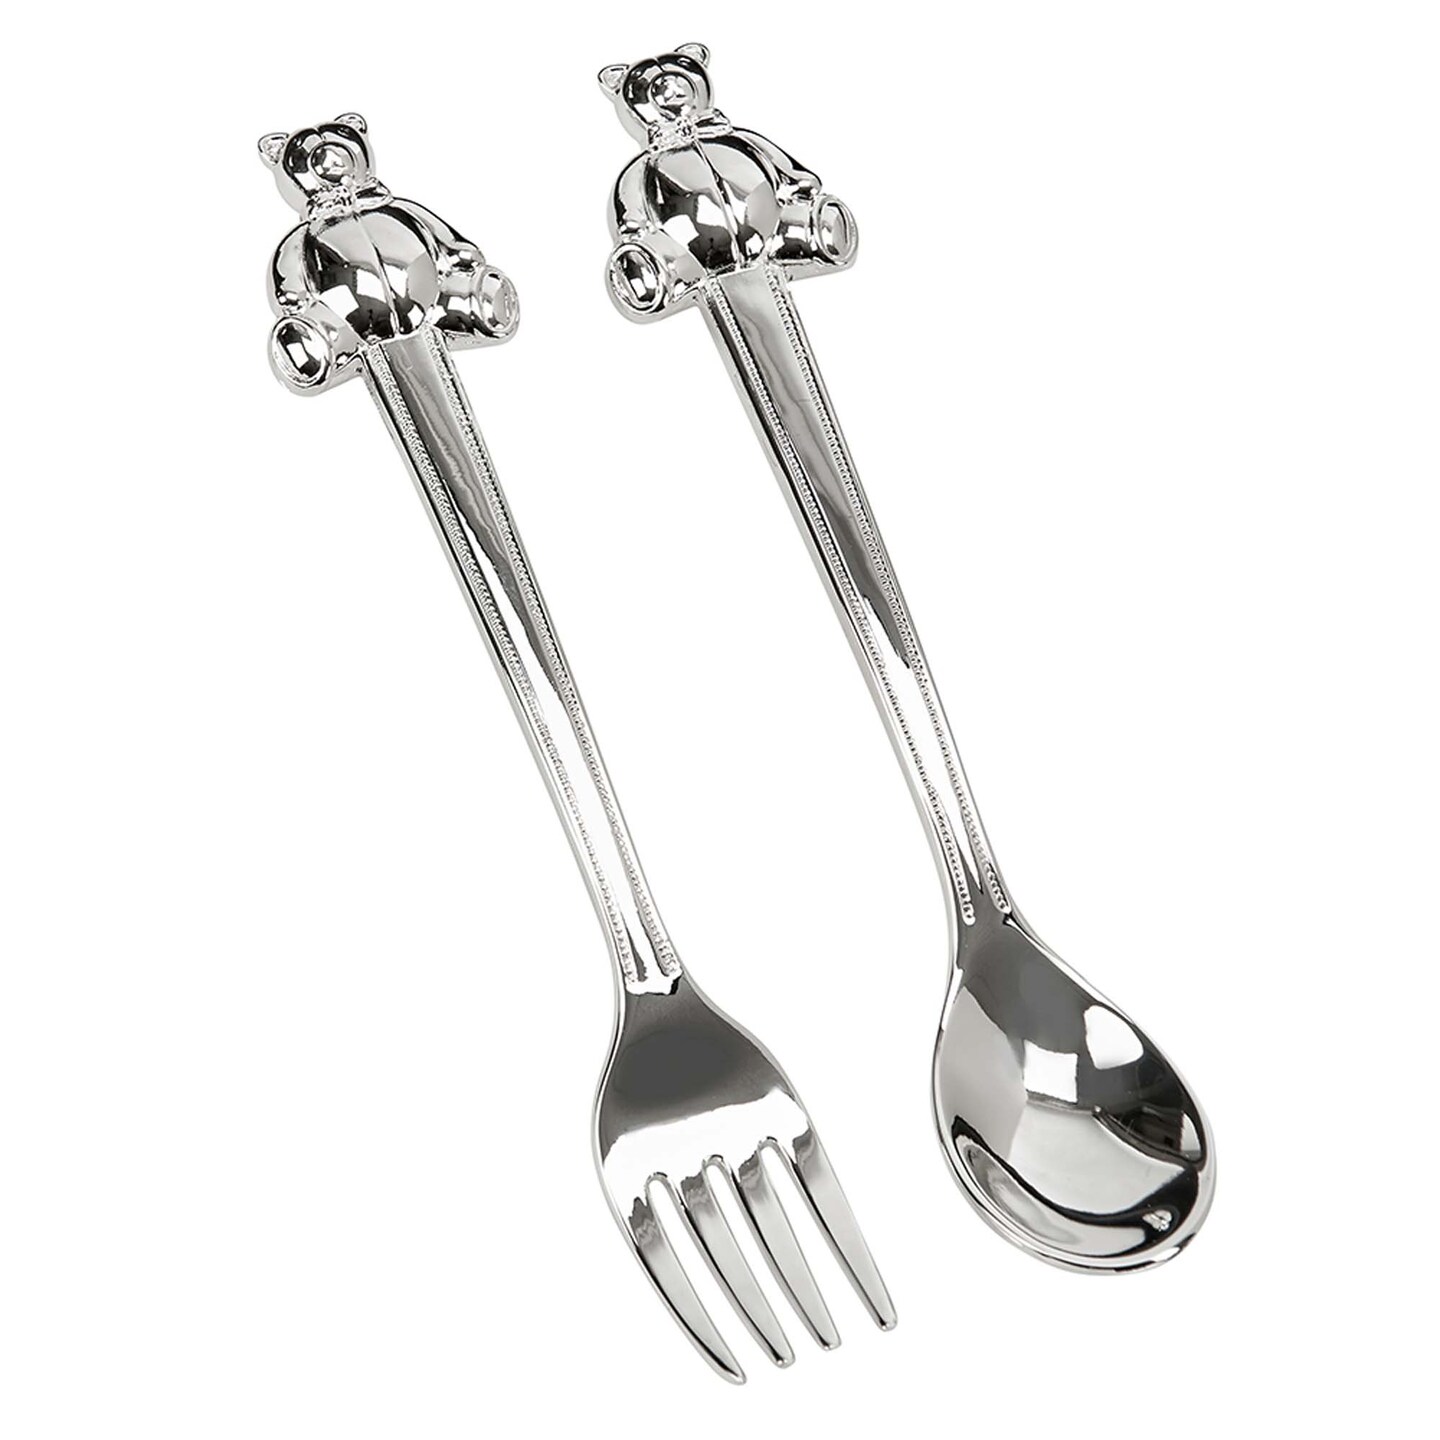 Contemporary Home Living Set of 2 Silver Baby Spoon and Fork Utensils with Teddy Bear Handle